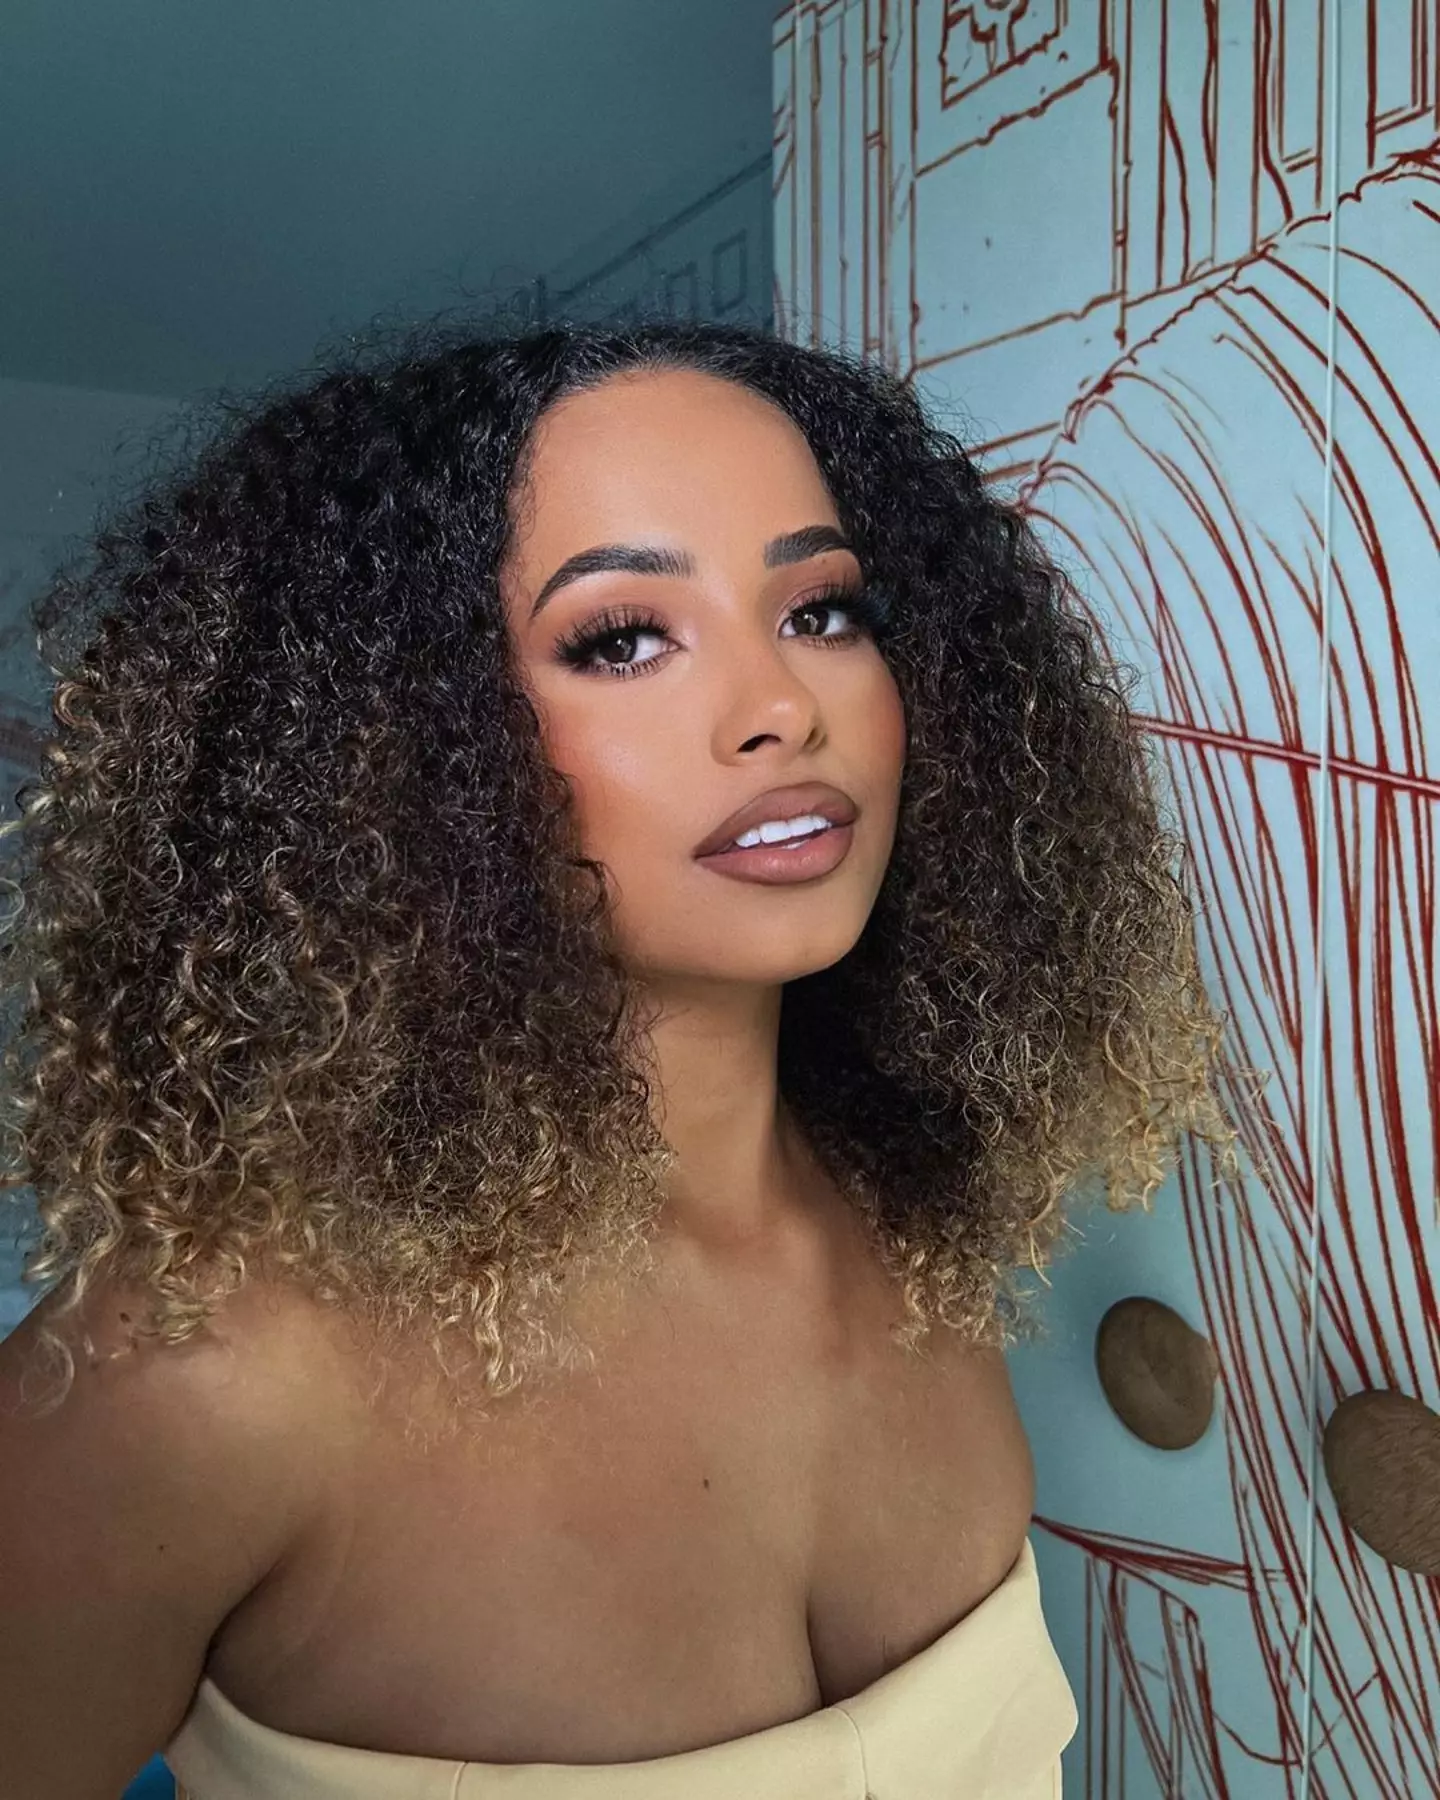 Amber Gill, 25, has admitted that she's still 'figuring out' her sexuality but is enjoying her 'fun' relationship with Jen Beattie, 31.